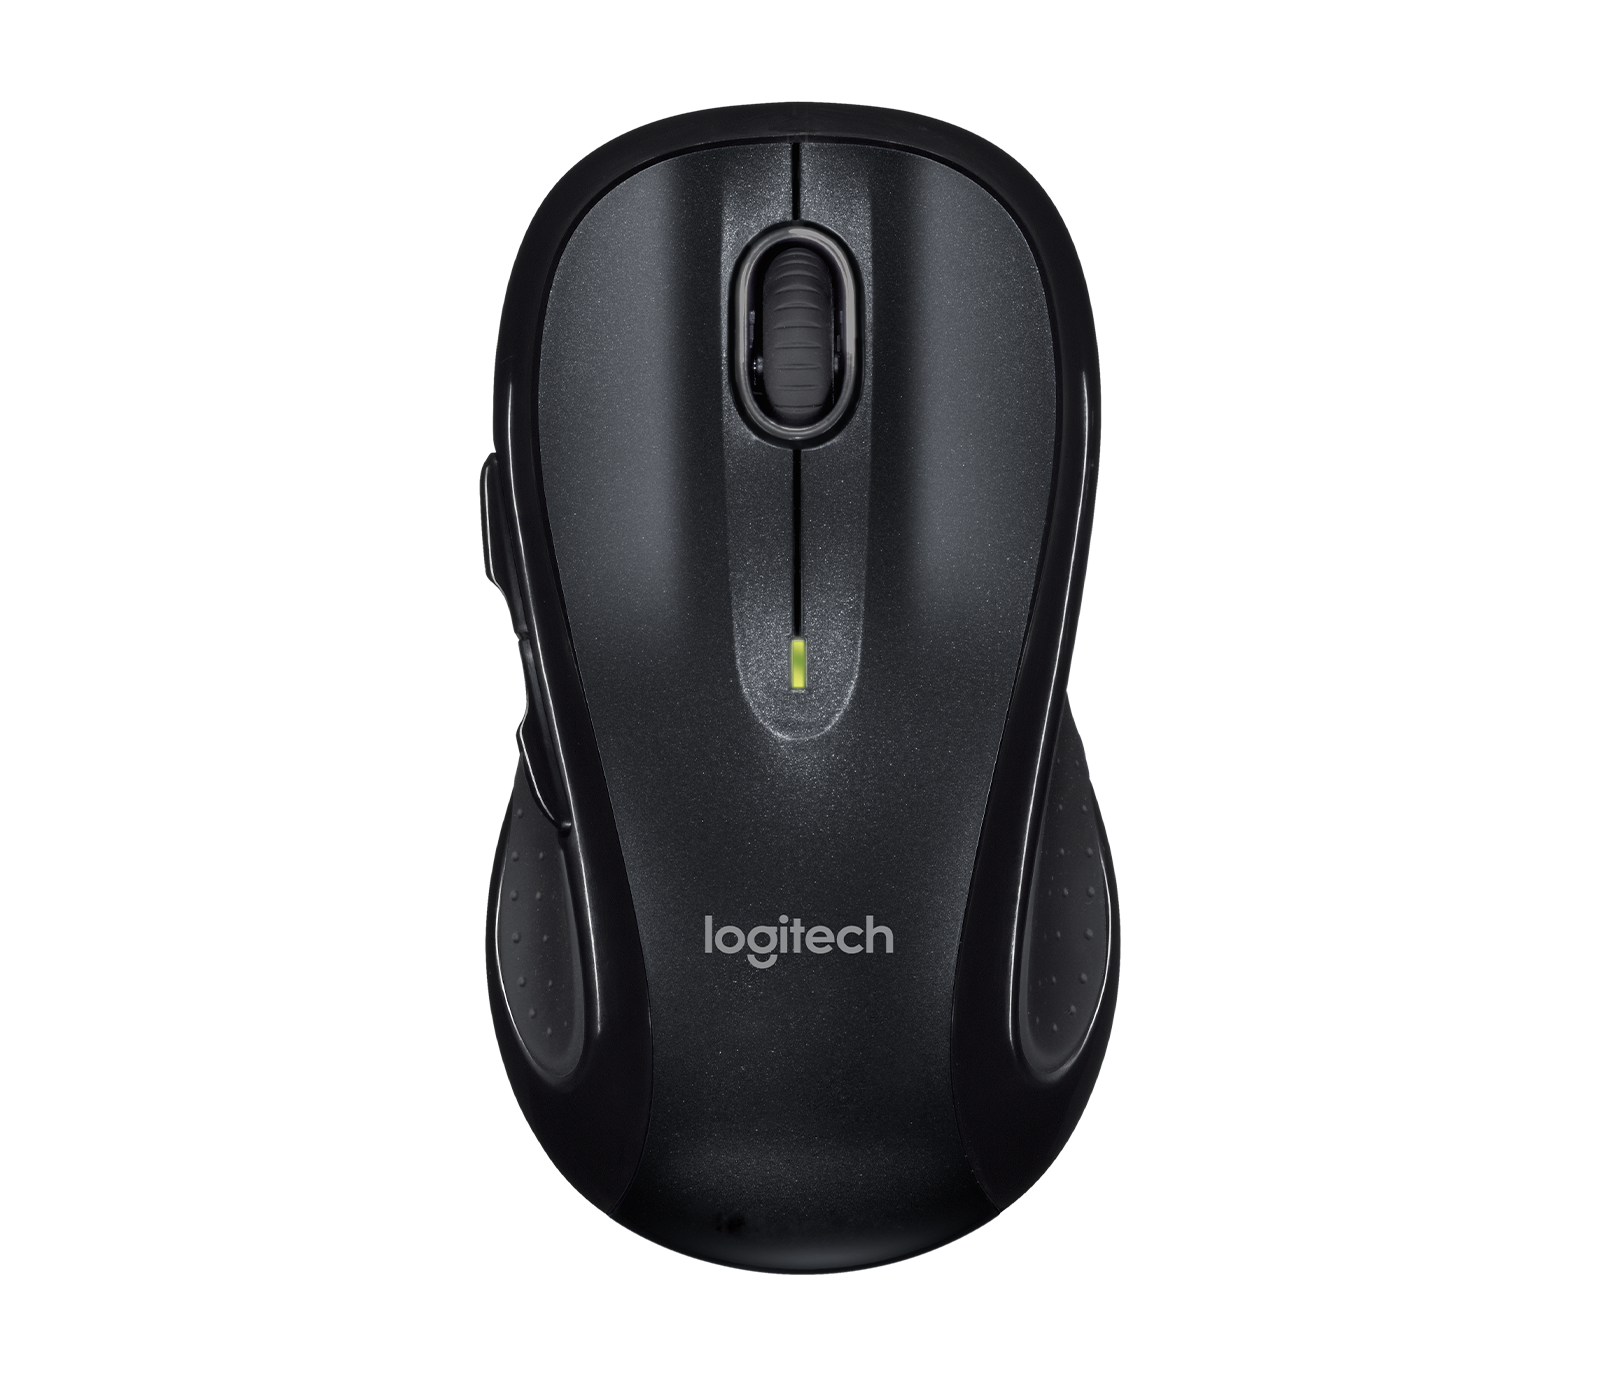 Visit the official Logitech website (www.logitech.com) using your preferred web browser.
Navigate to the Support or Downloads section.